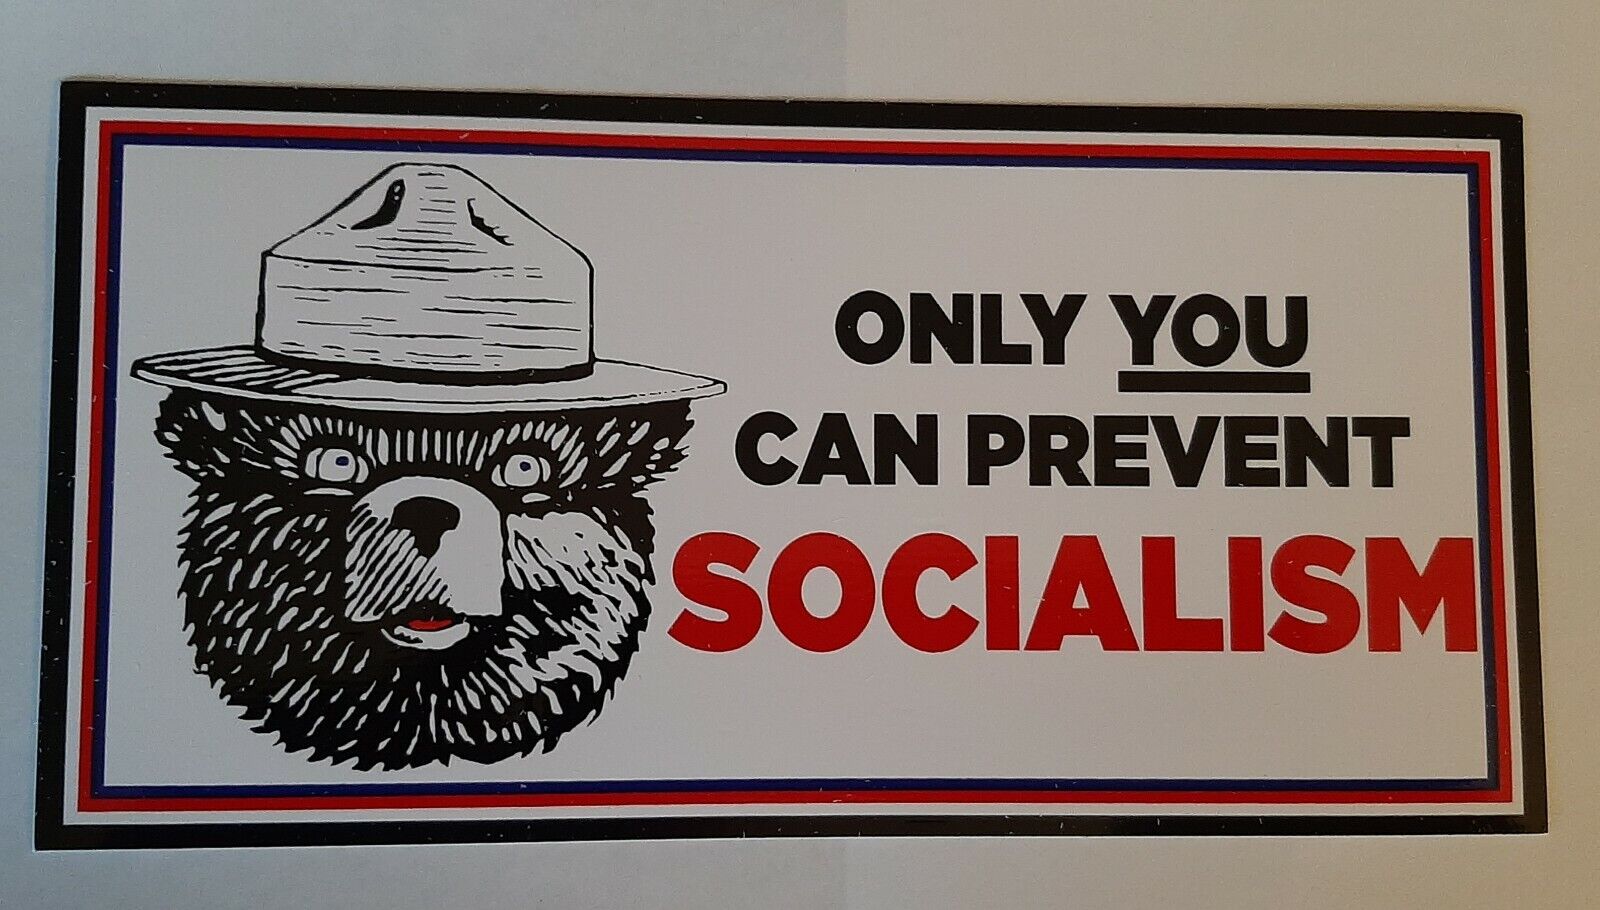 ONLY YOU CAN PREVENT SOCIALISM BUMPER STICKER